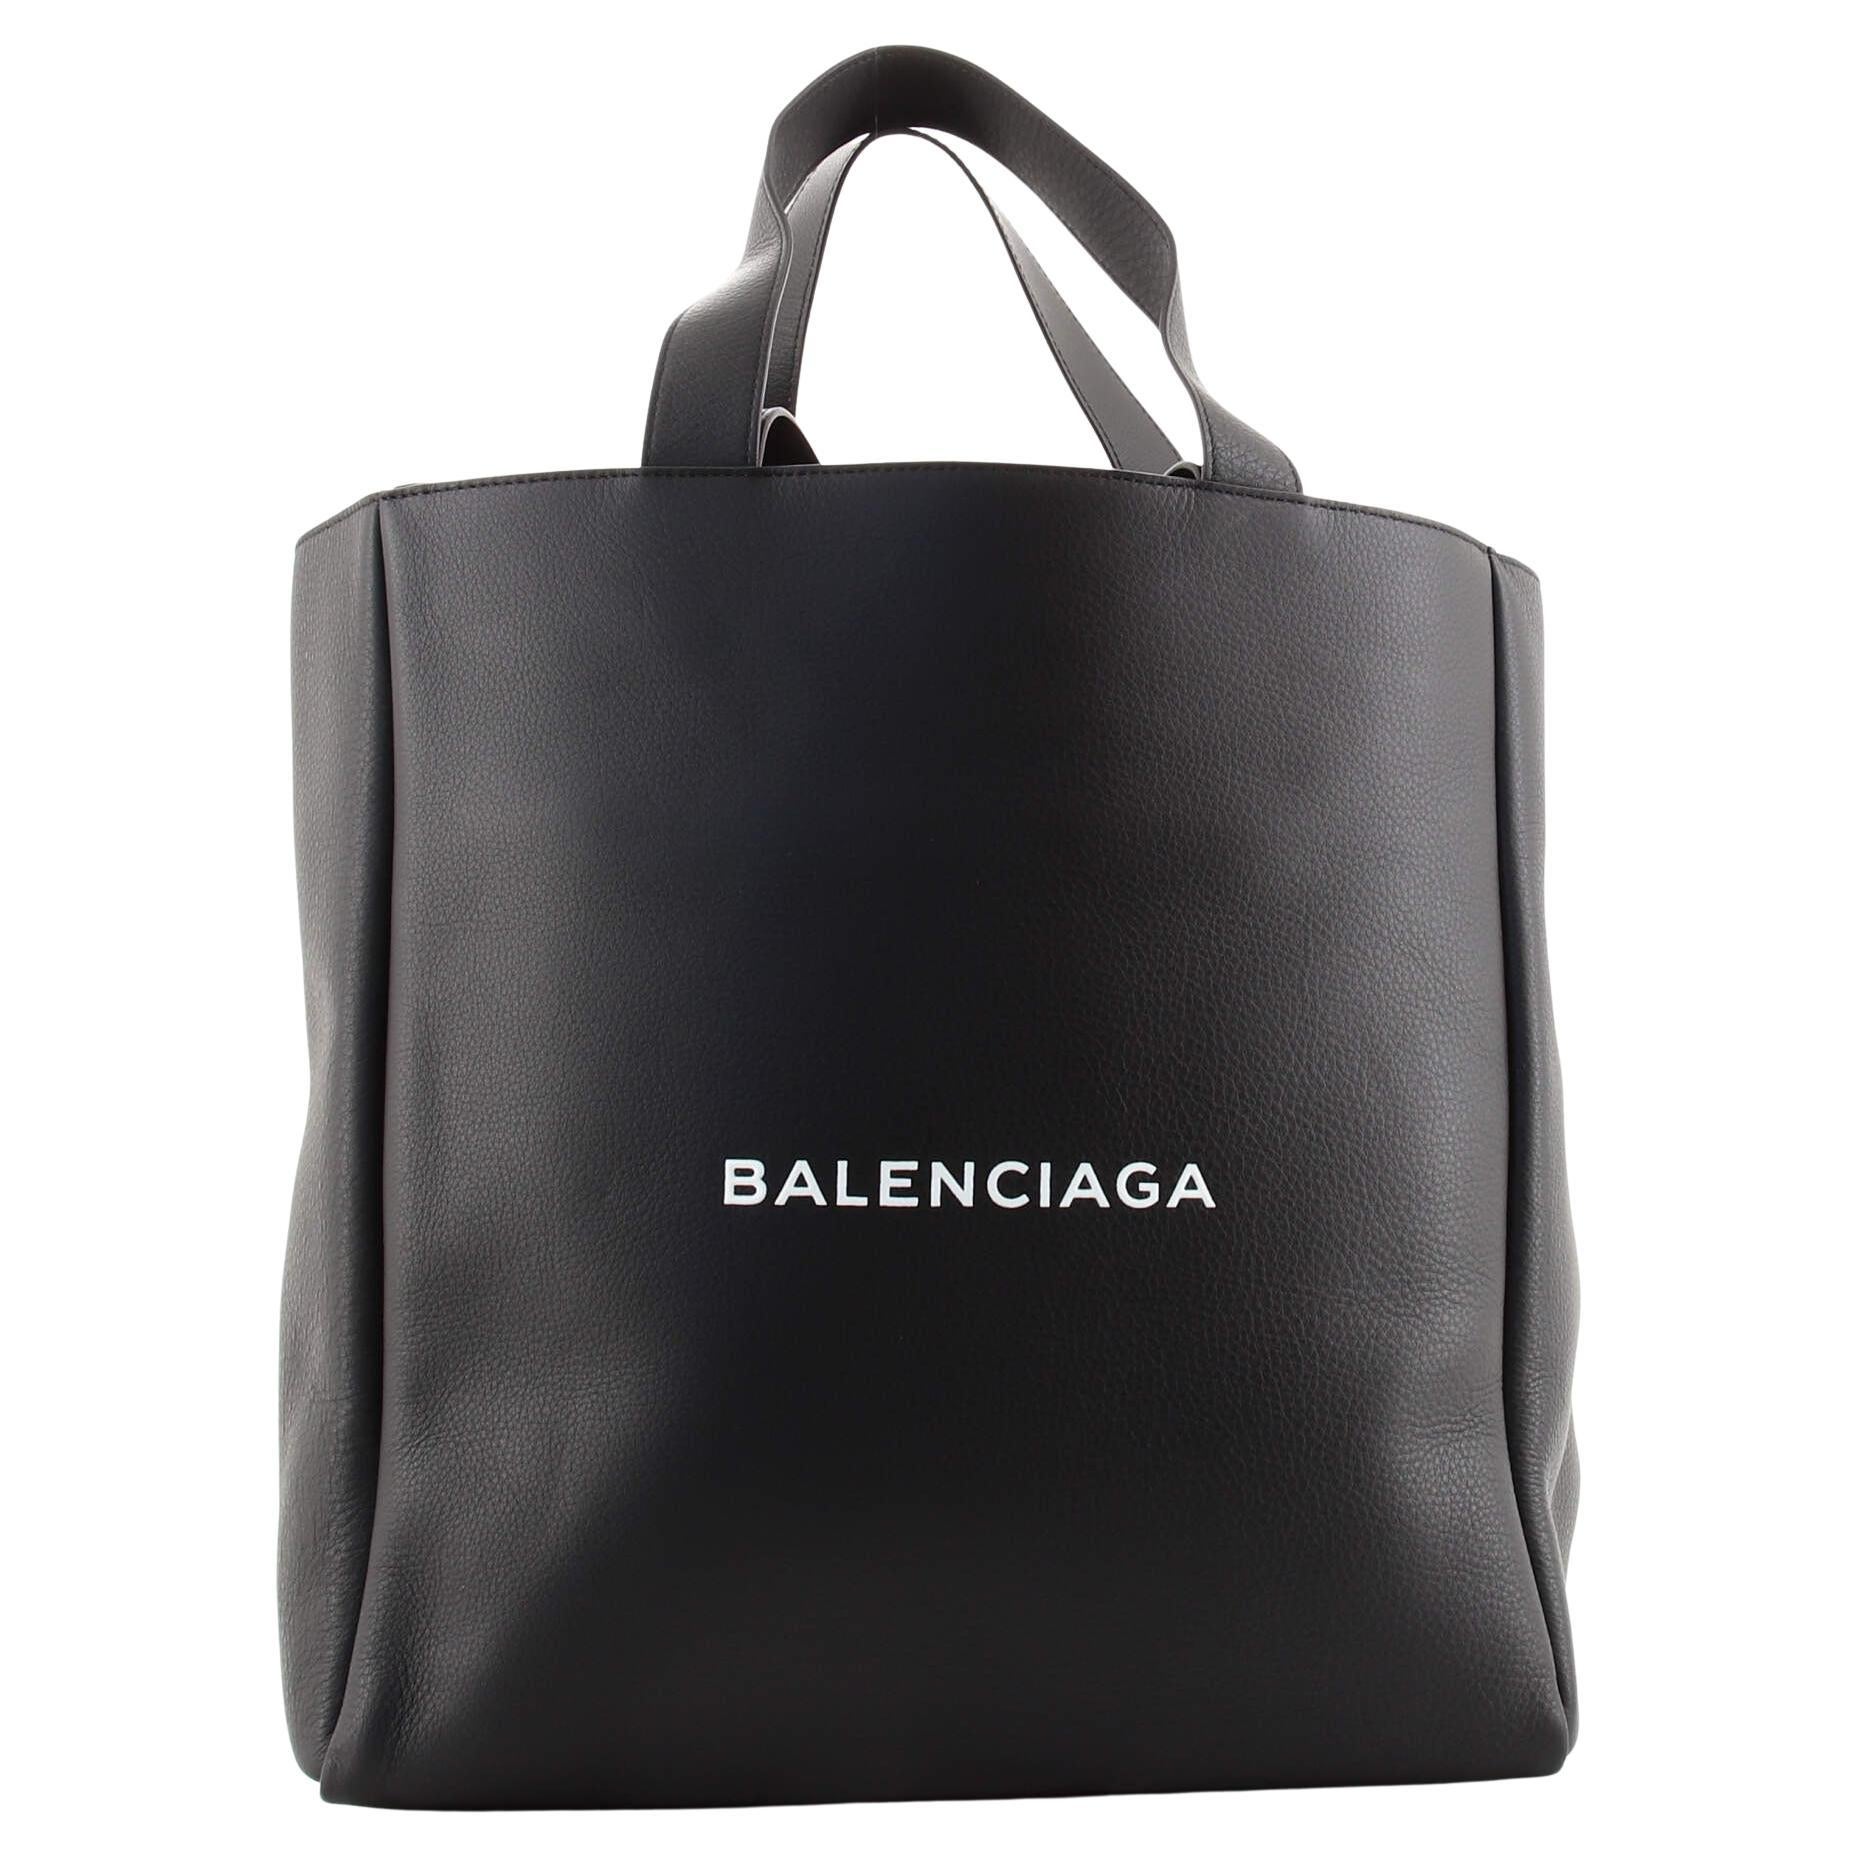 Balenciaga Everyday Carry Tote Leather